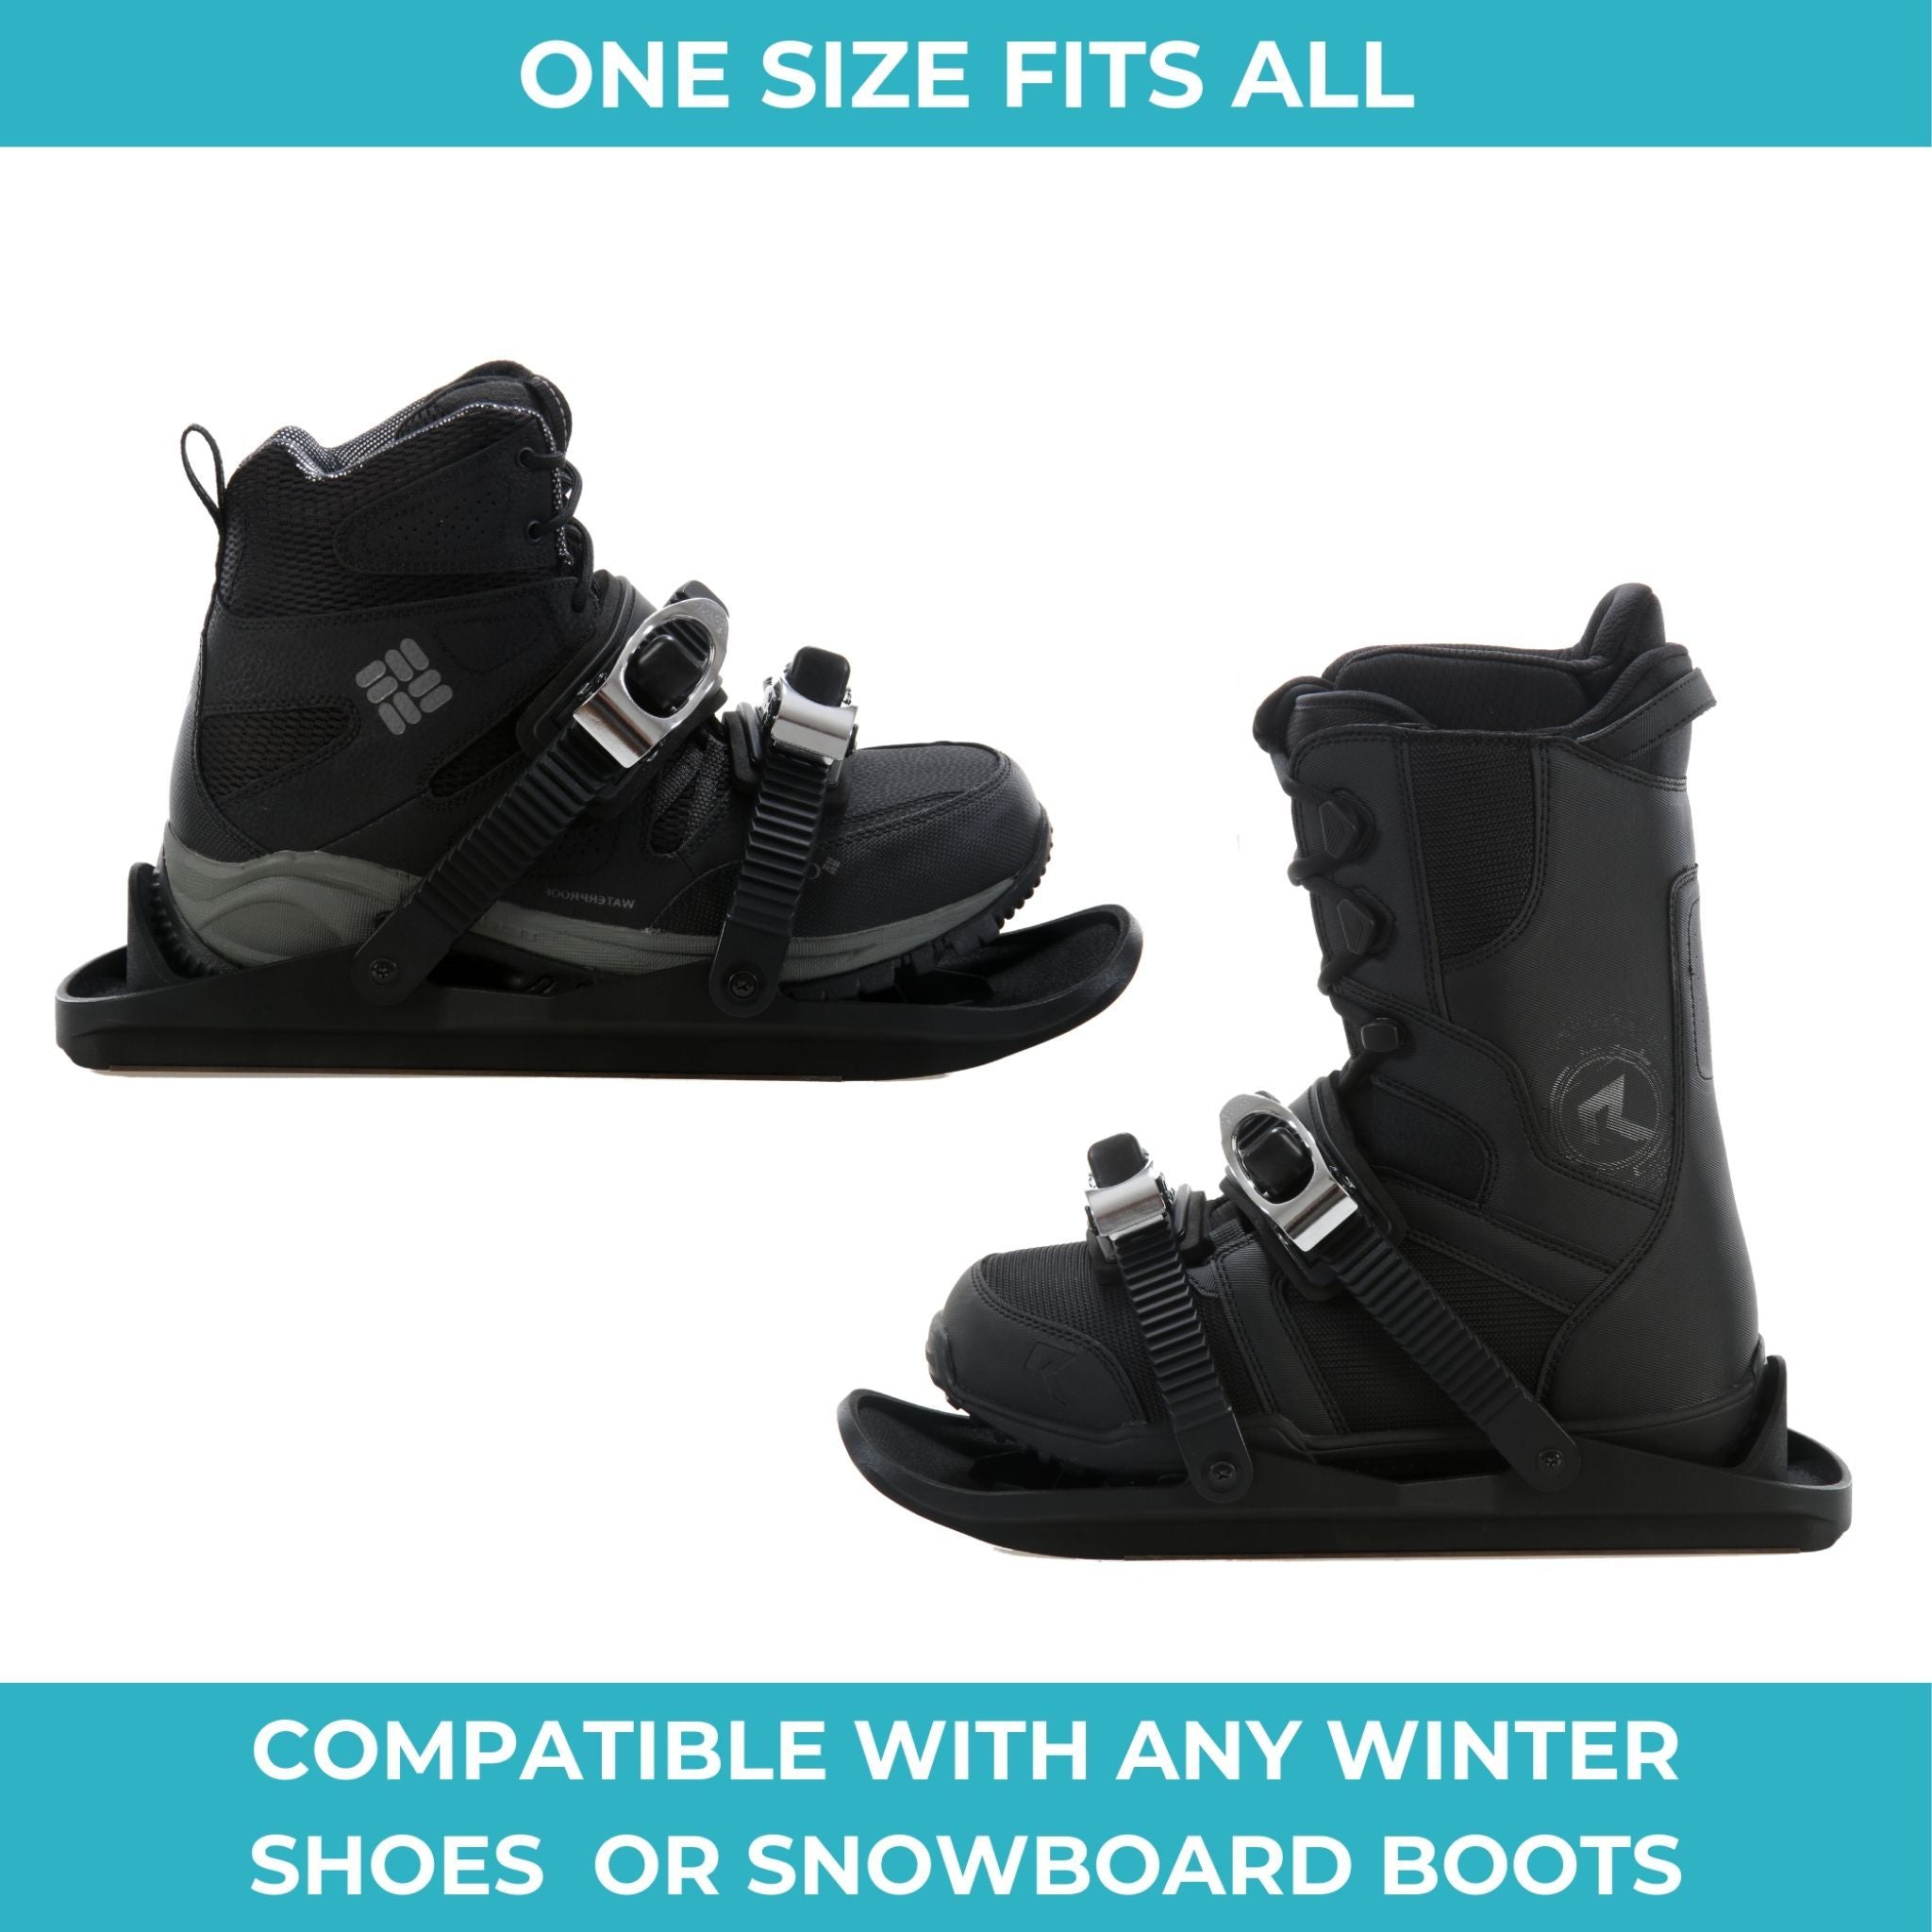 Snowfeet - Mini skis, One size fits all, compatible with any winter shoes or snowboard boots.